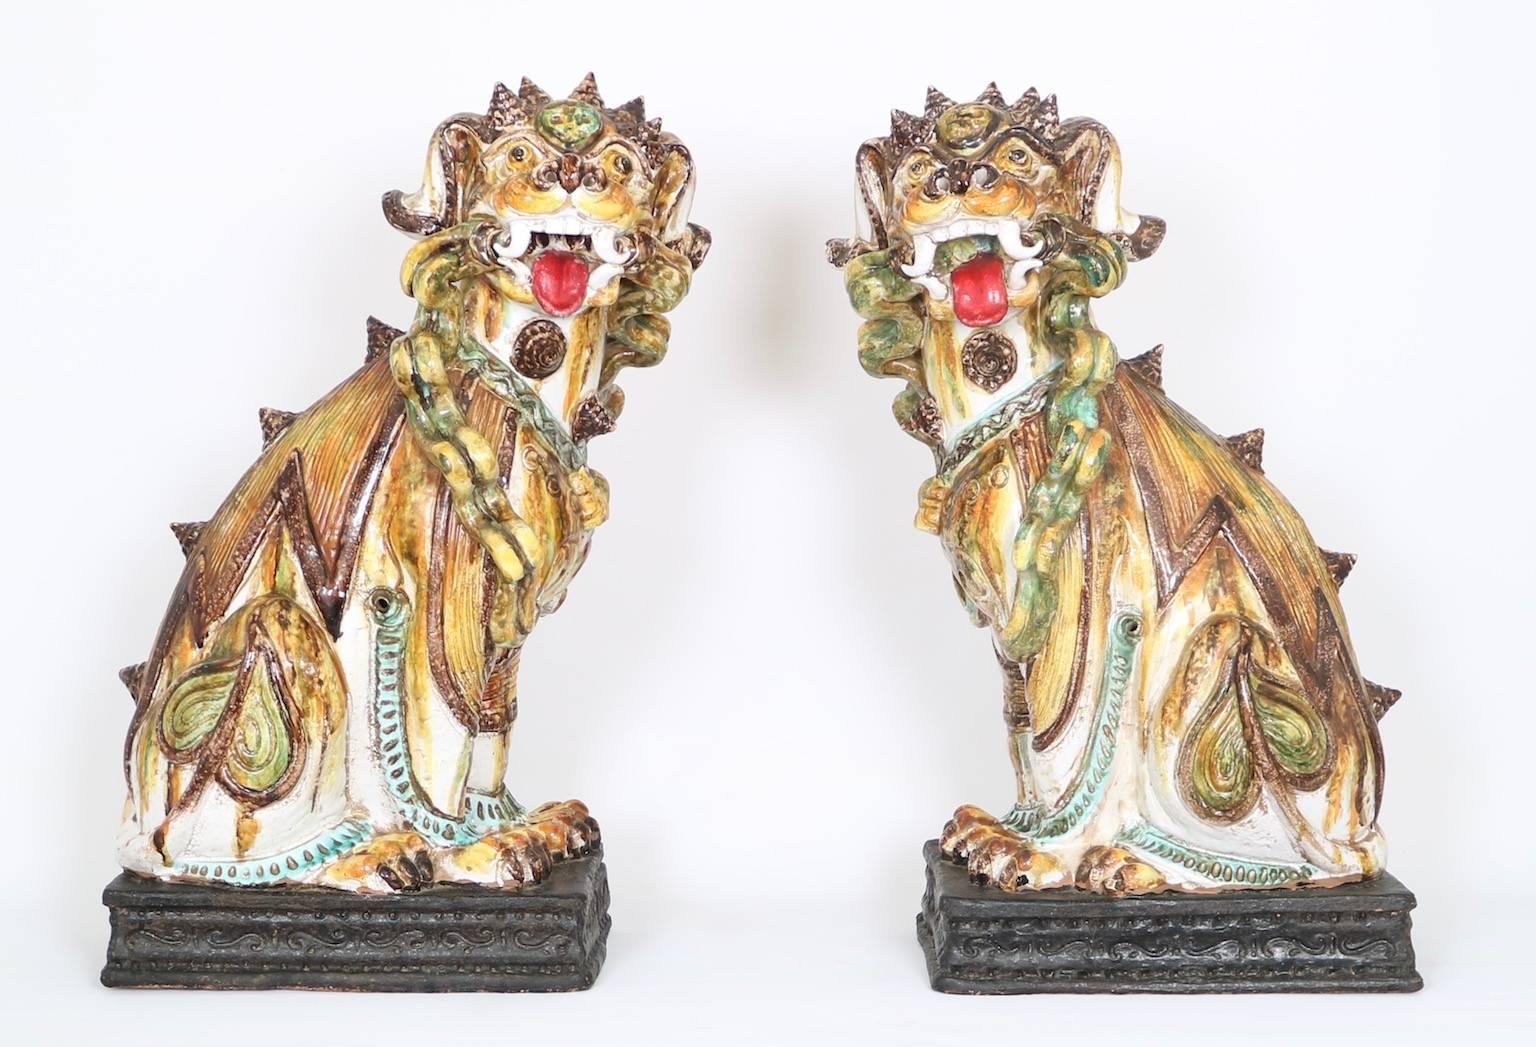 A pair of large terracotta Majolica foo dogs, produced in the Hollywood Regency era circa 1950s, in multicolored glazes, a very good Mid-Century Modern era Italian interpretation of Chinese models. Excellent vintage condition, consistent with age